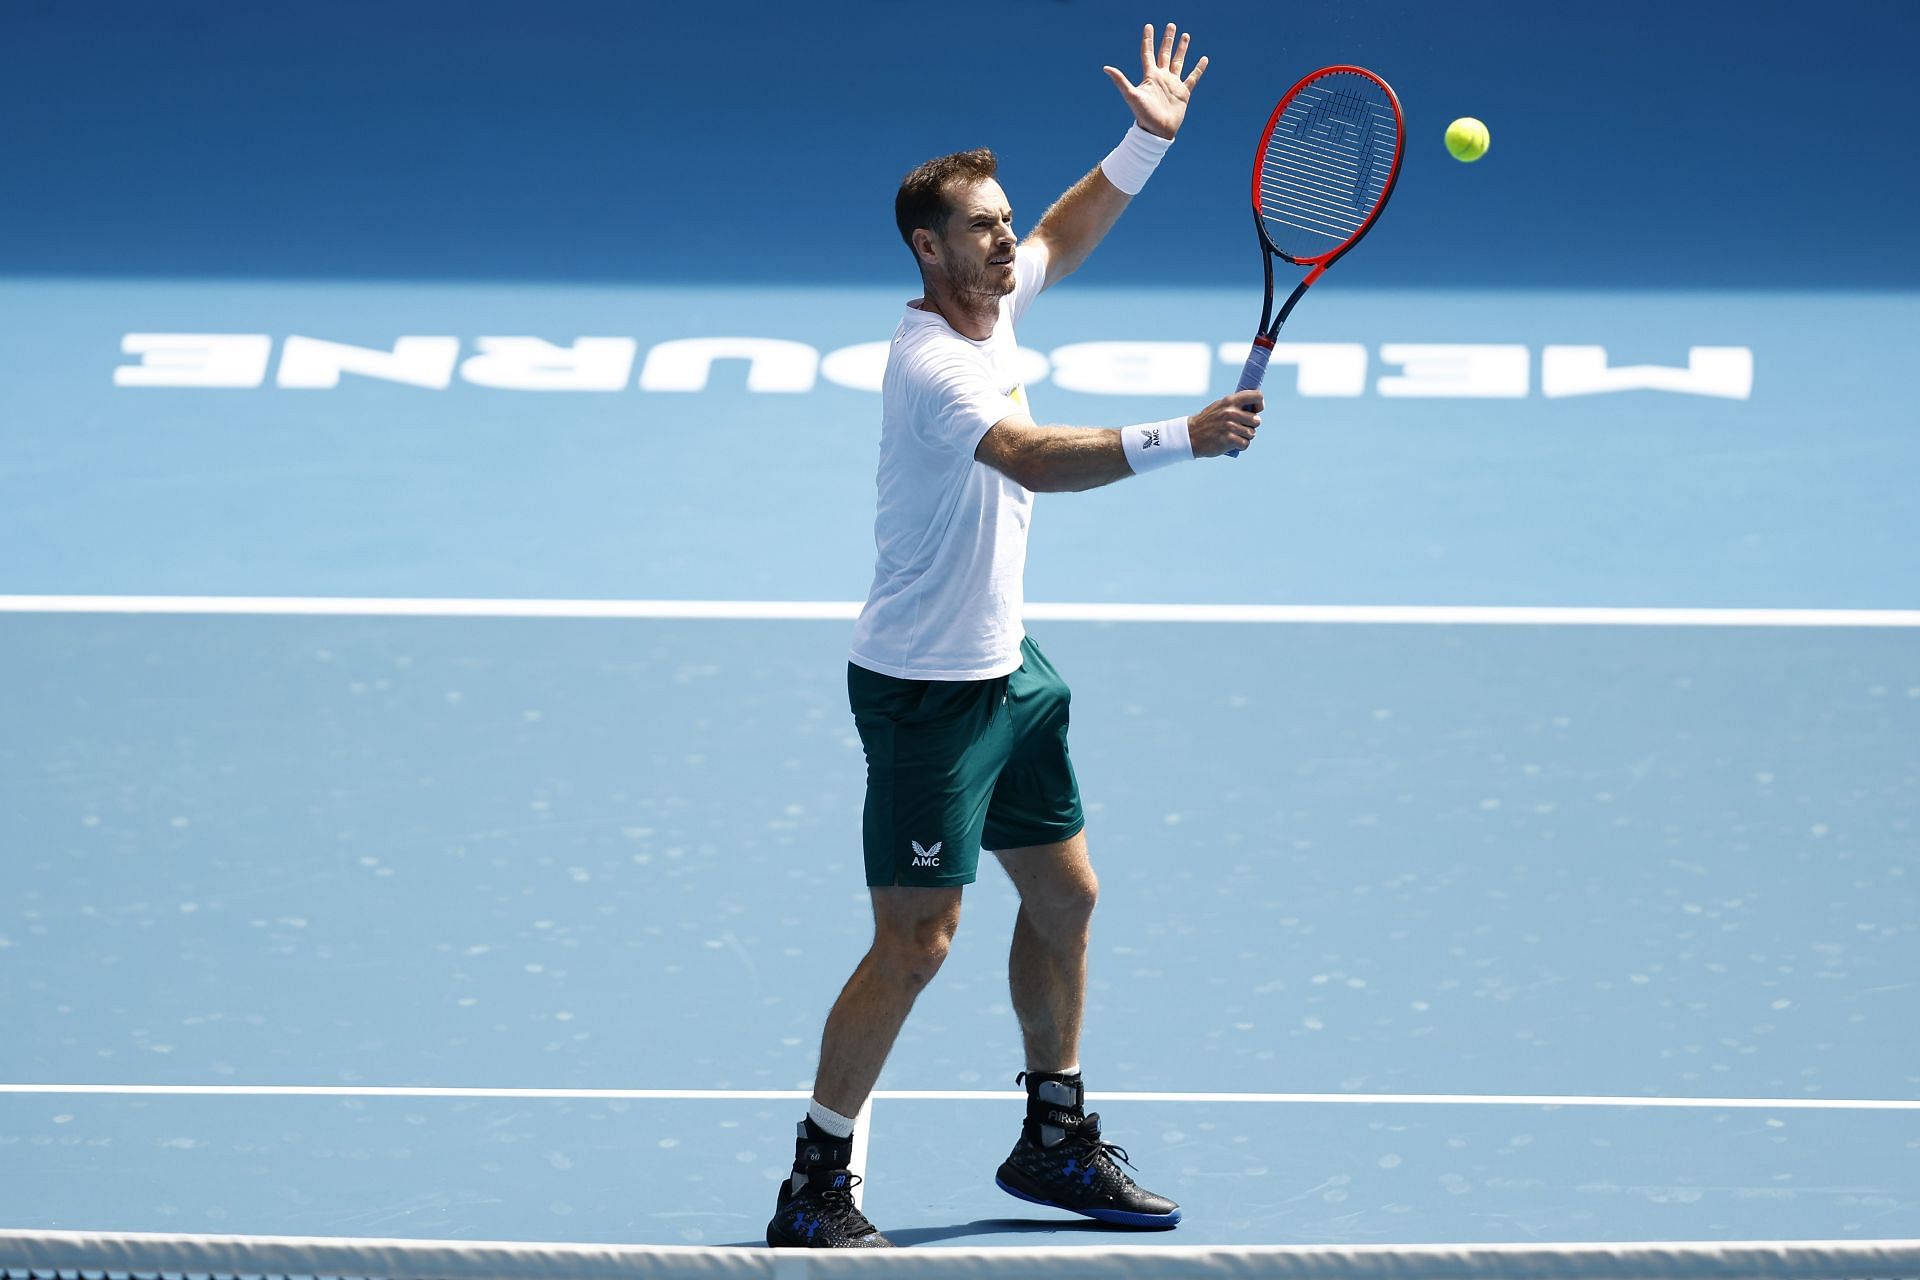 Andy Murray plays a backhand shot during a practice session